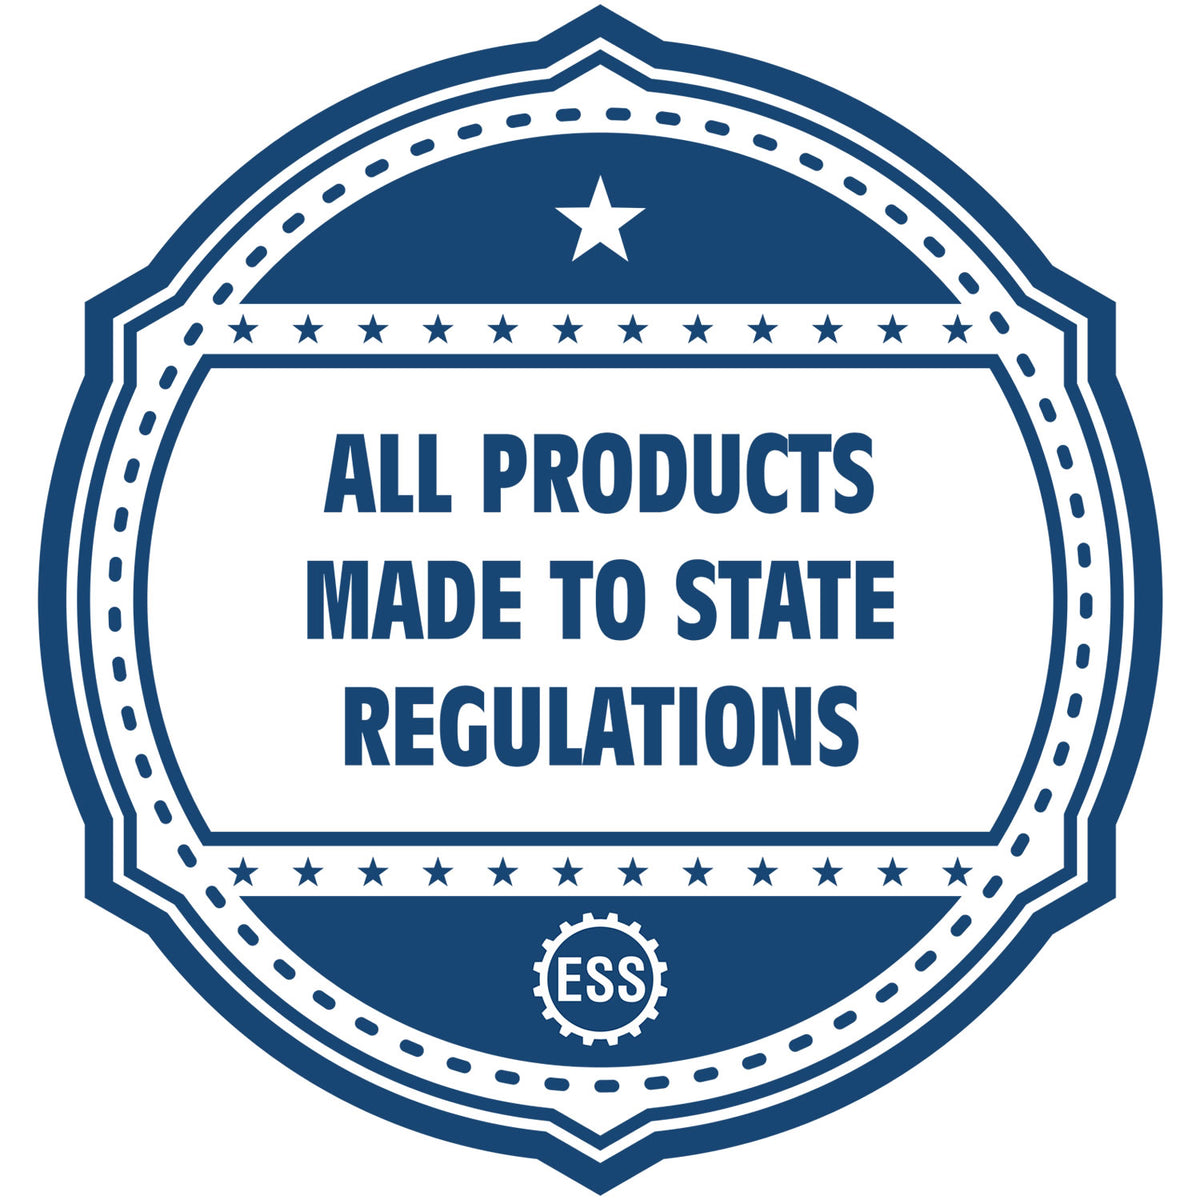 An icon or badge element for the Wooden Handle Georgia Rectangular Notary Public Stamp showing that this product is made in compliance with state regulations.